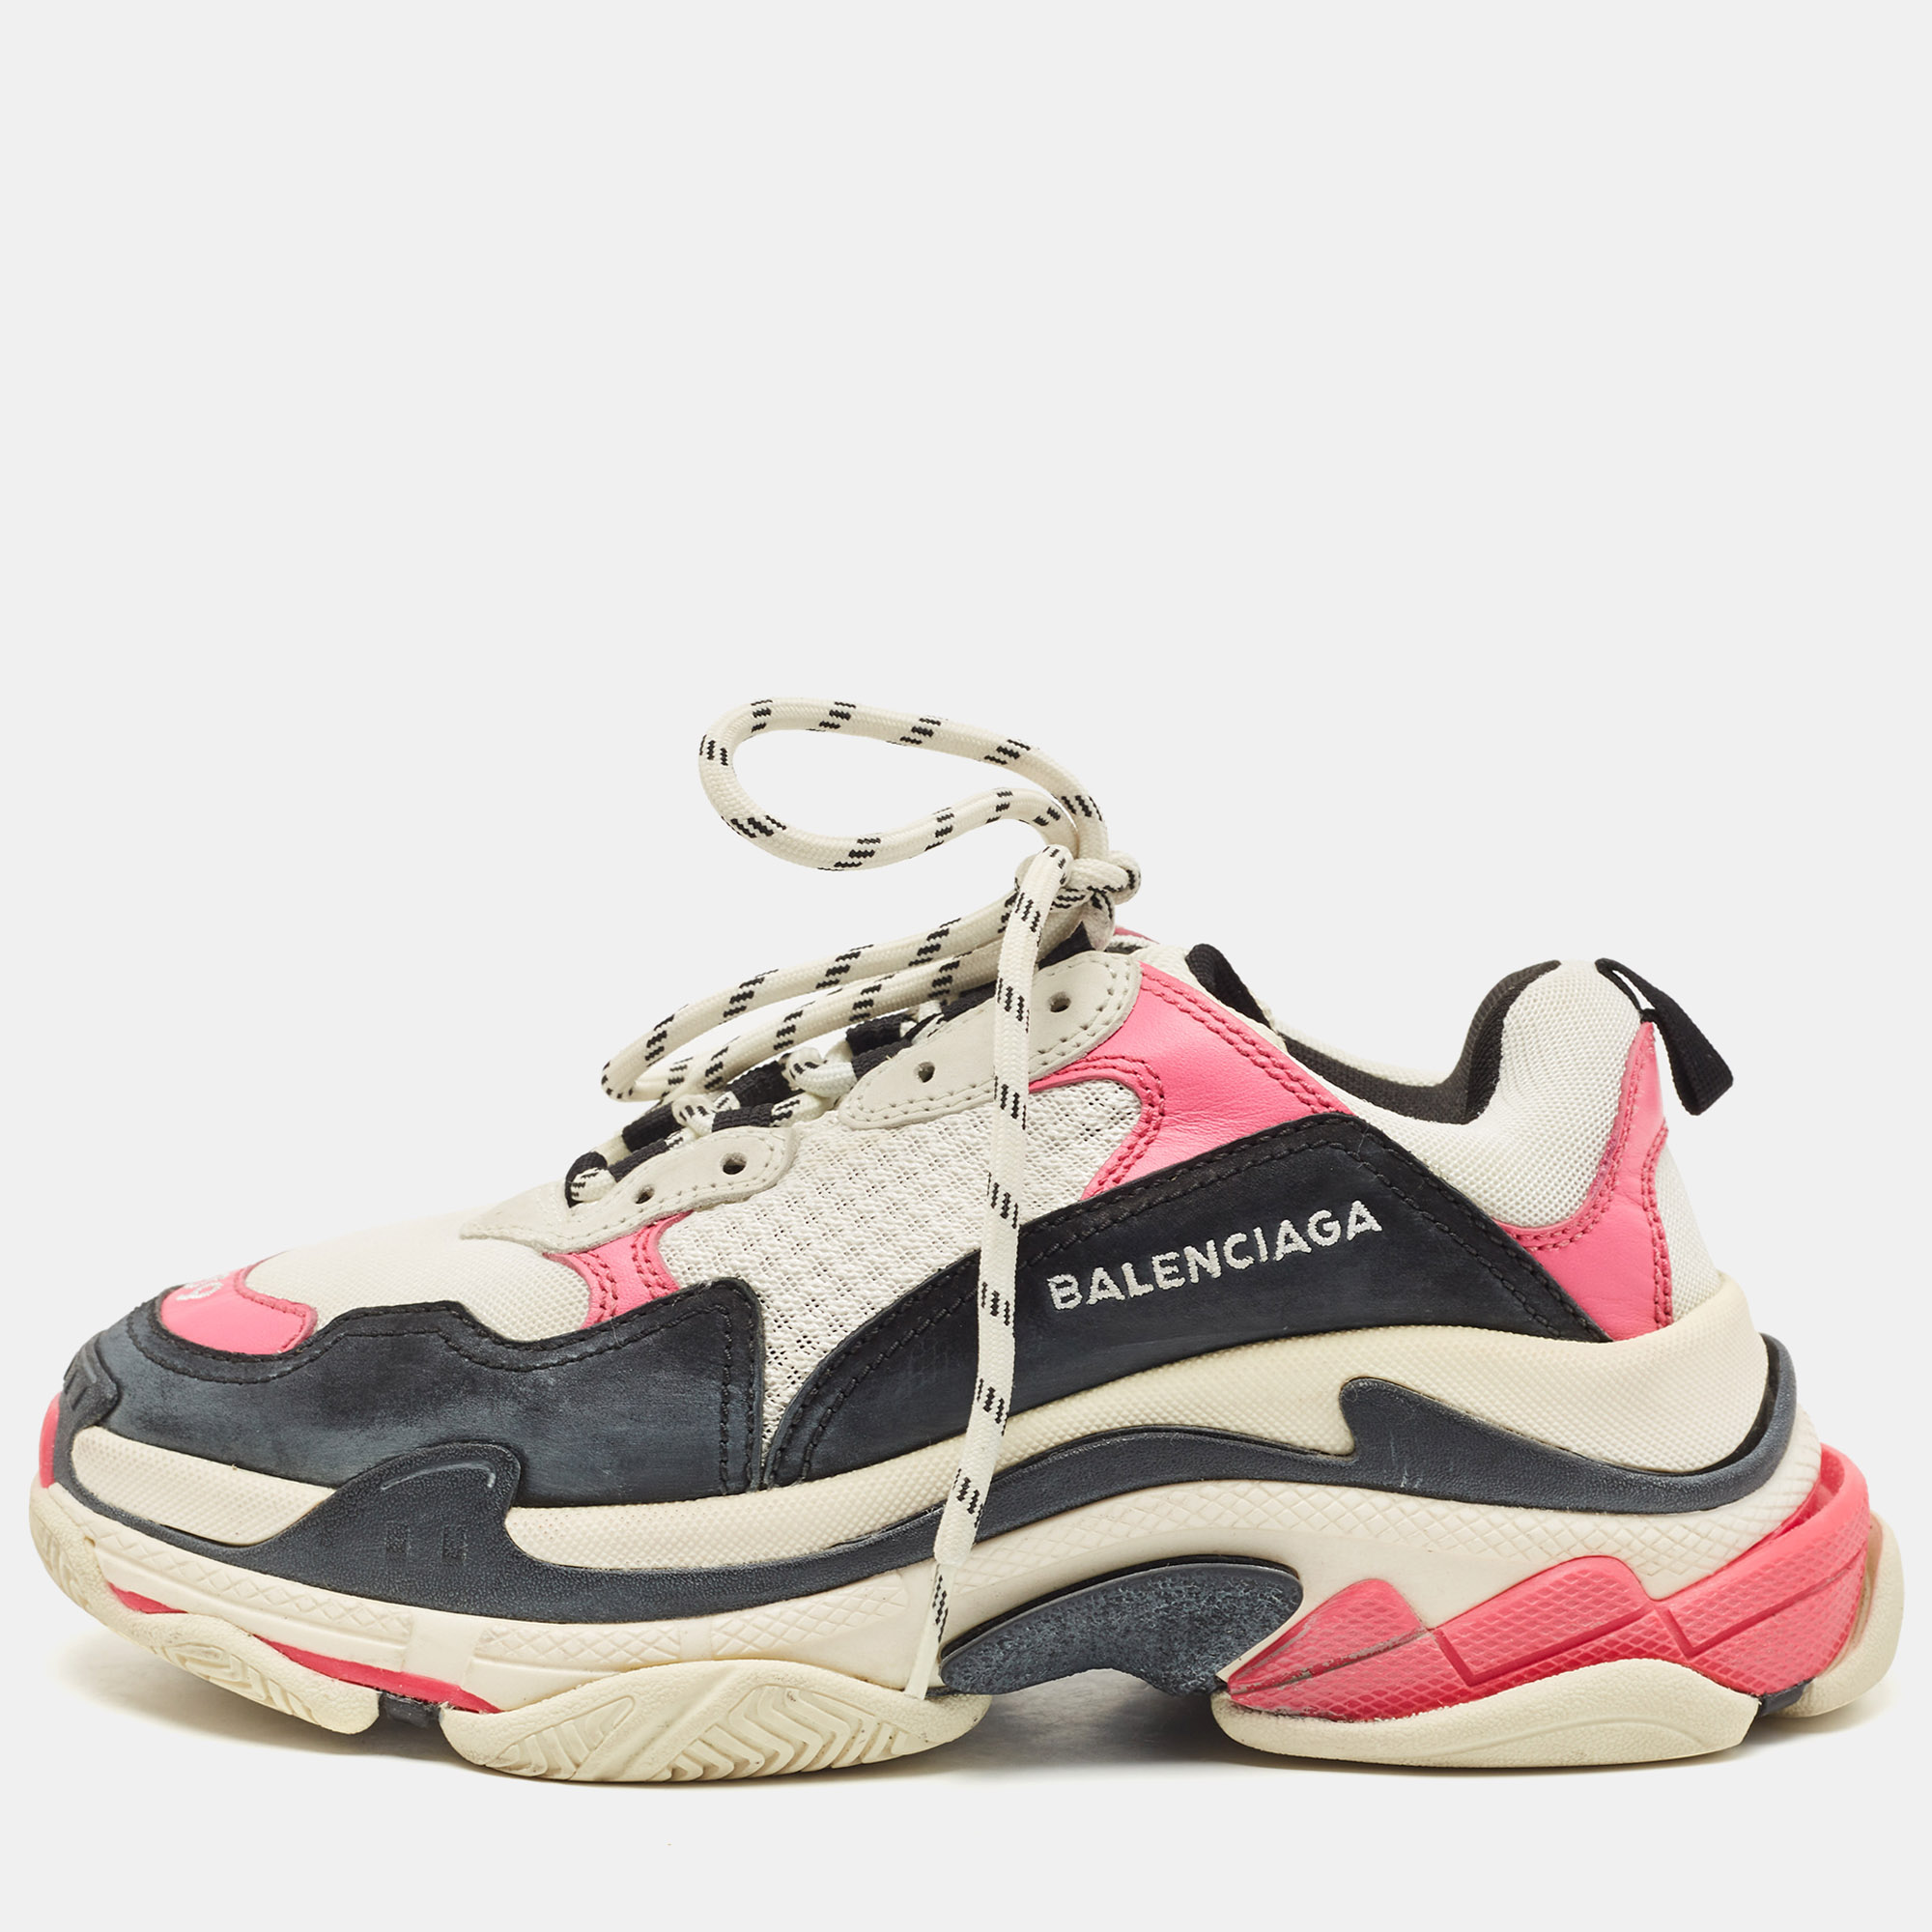 Balenciaga Tricolor Leather And Mesh Triple S Sneakers Size 39